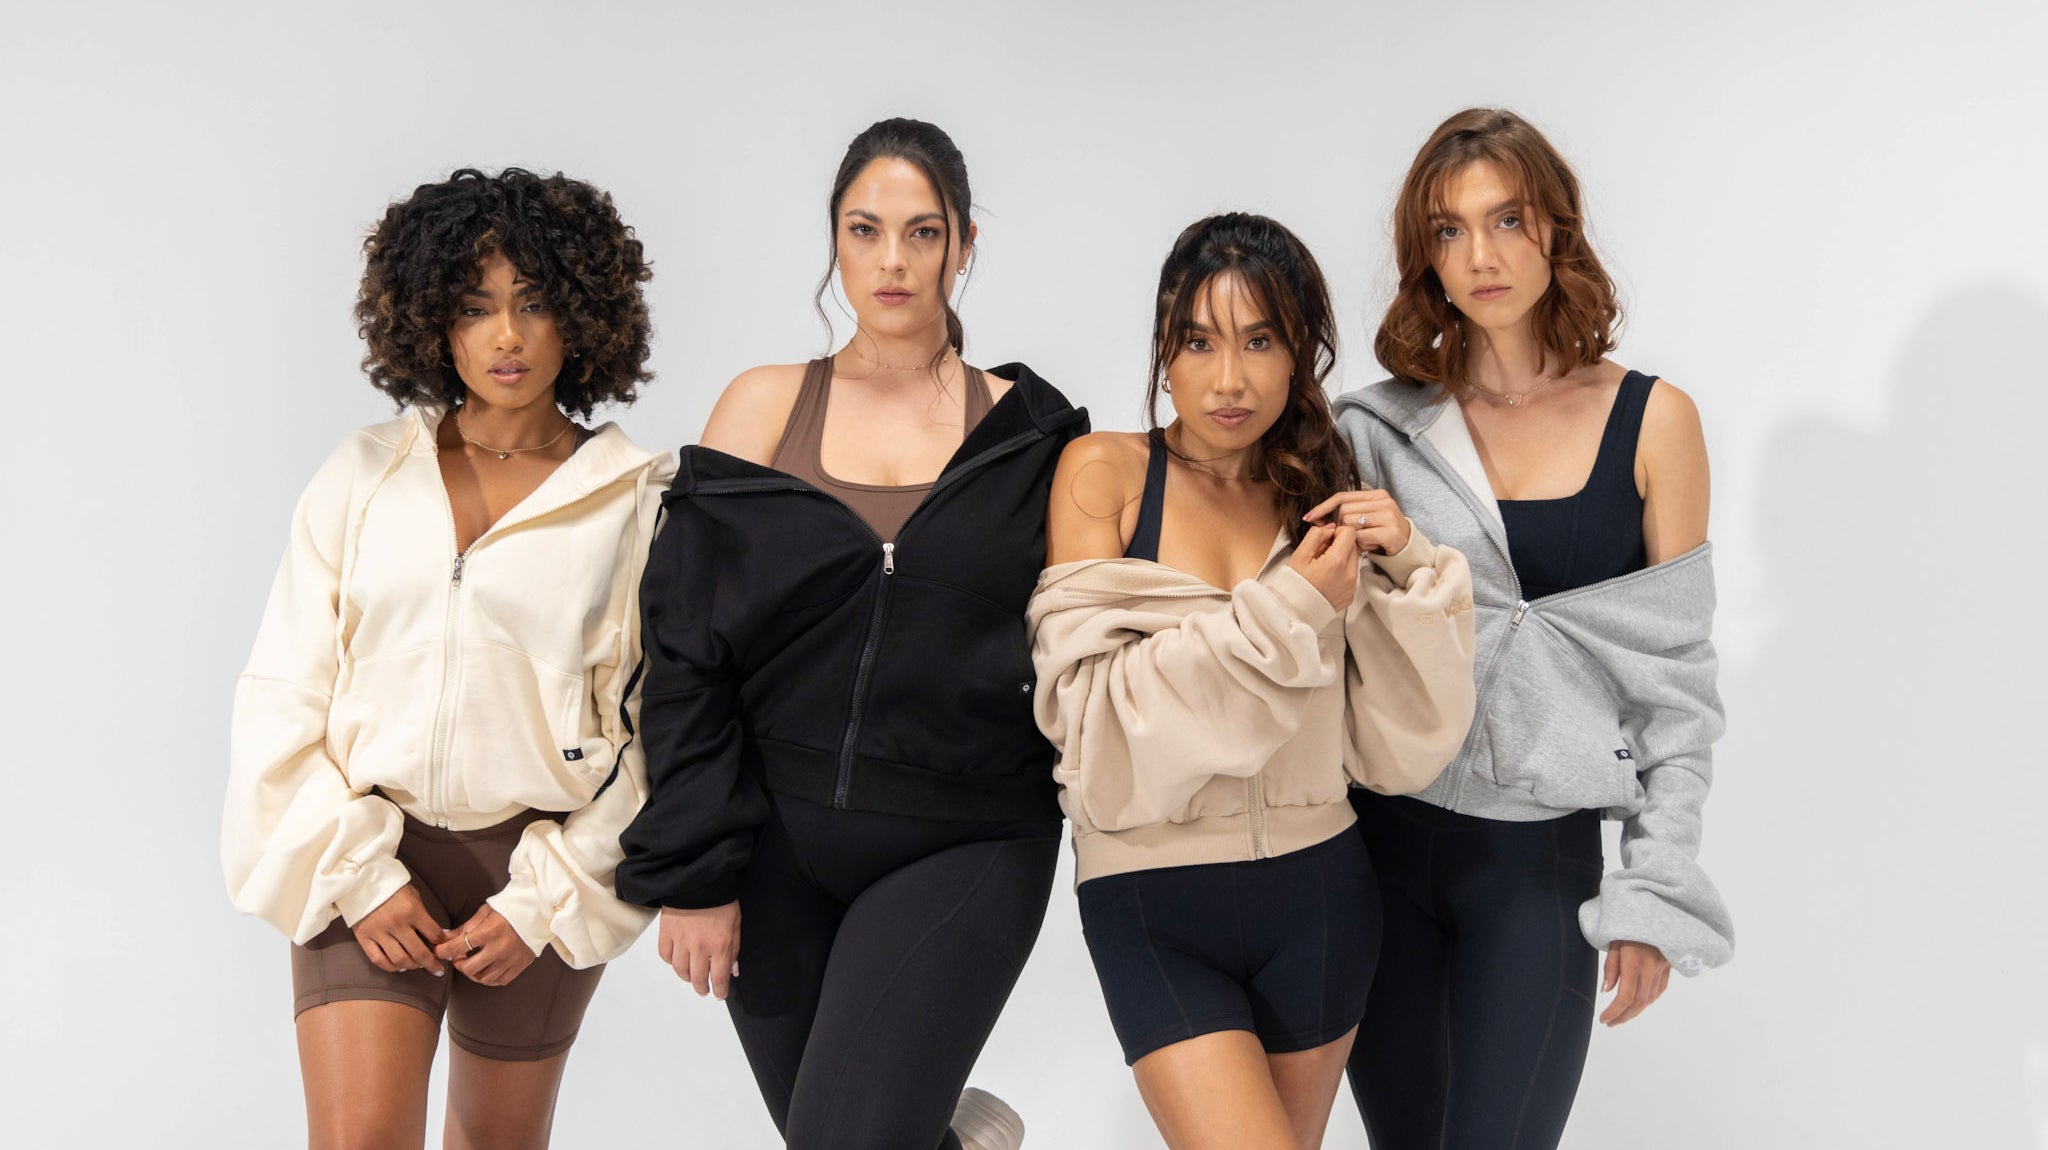 Back to Basics: Explore Our New Collection of Comfortable and Cute Activewear